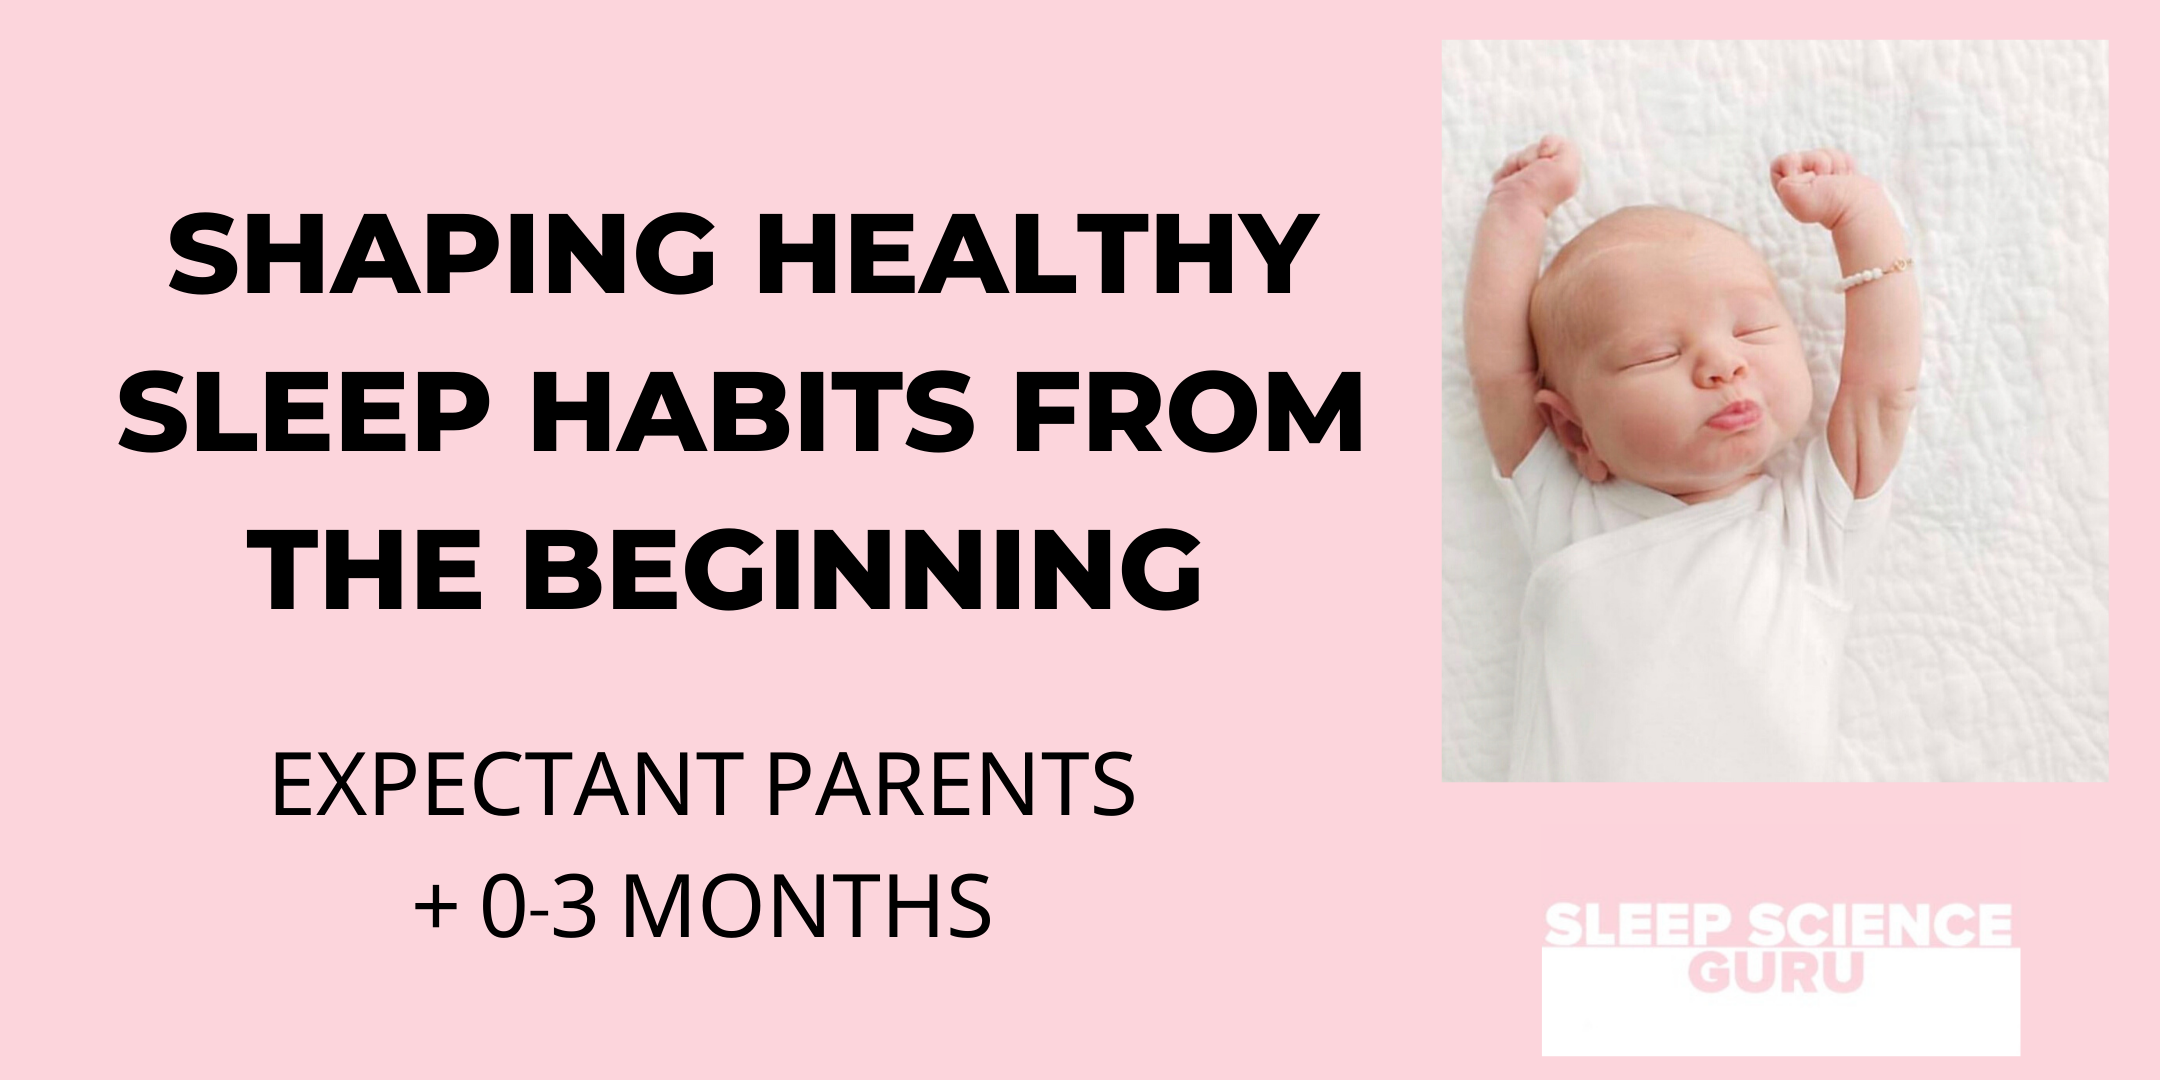 Shaping healthy sleep habits from the beginning: Expectant Parents + 0-3mth